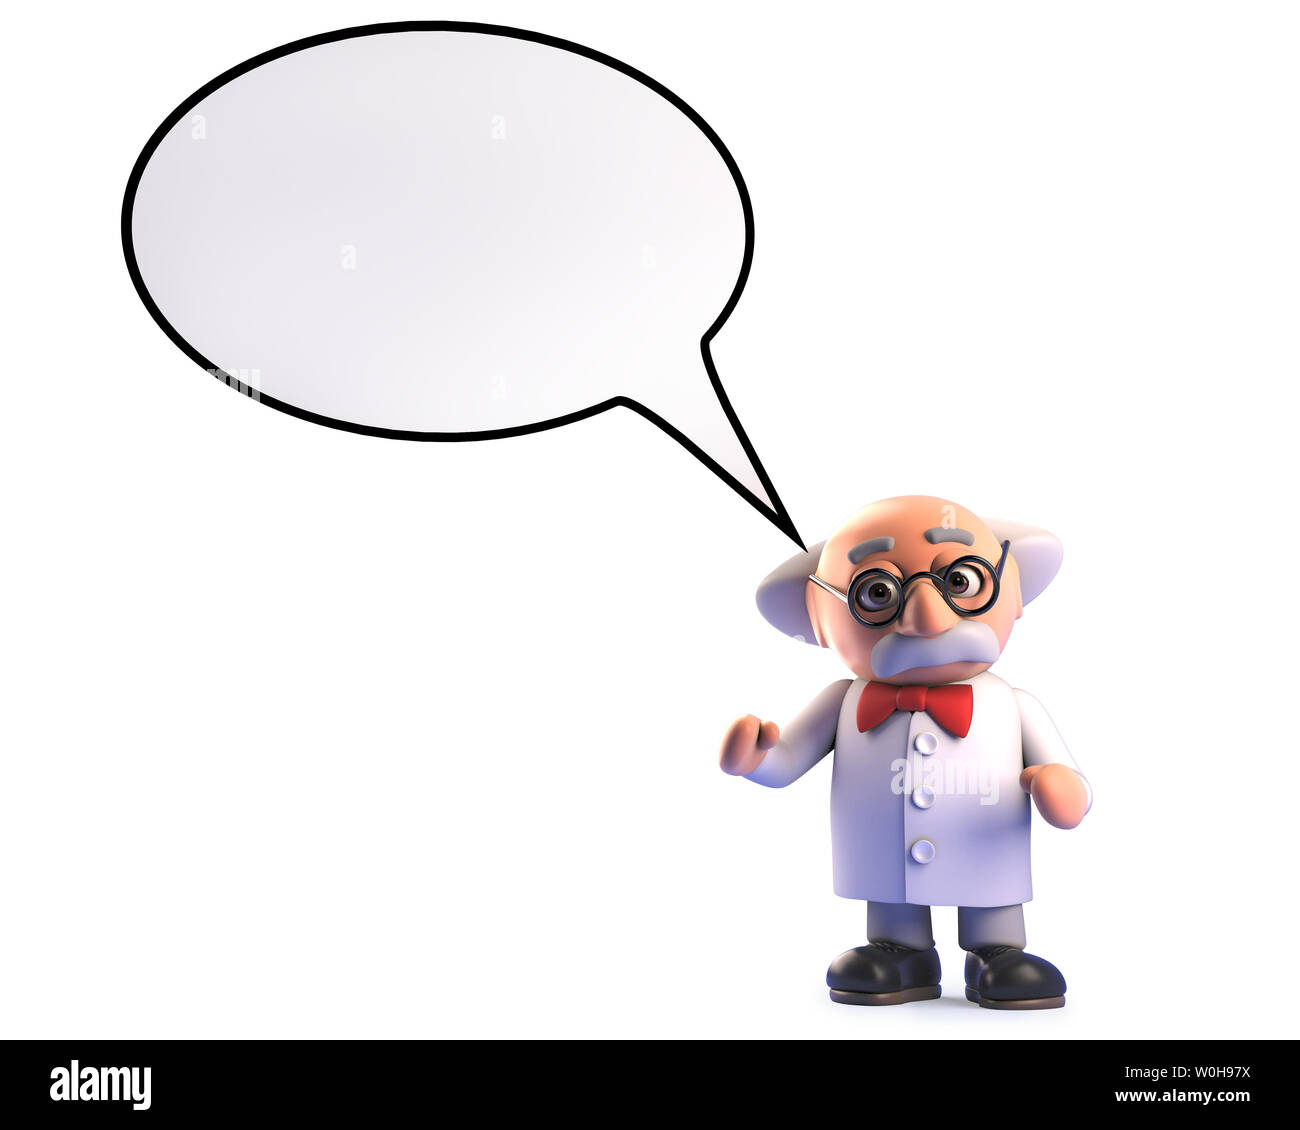 Rendered image of a crazy mad professor scientist with speech bubble, 3d illustration Stock Photo